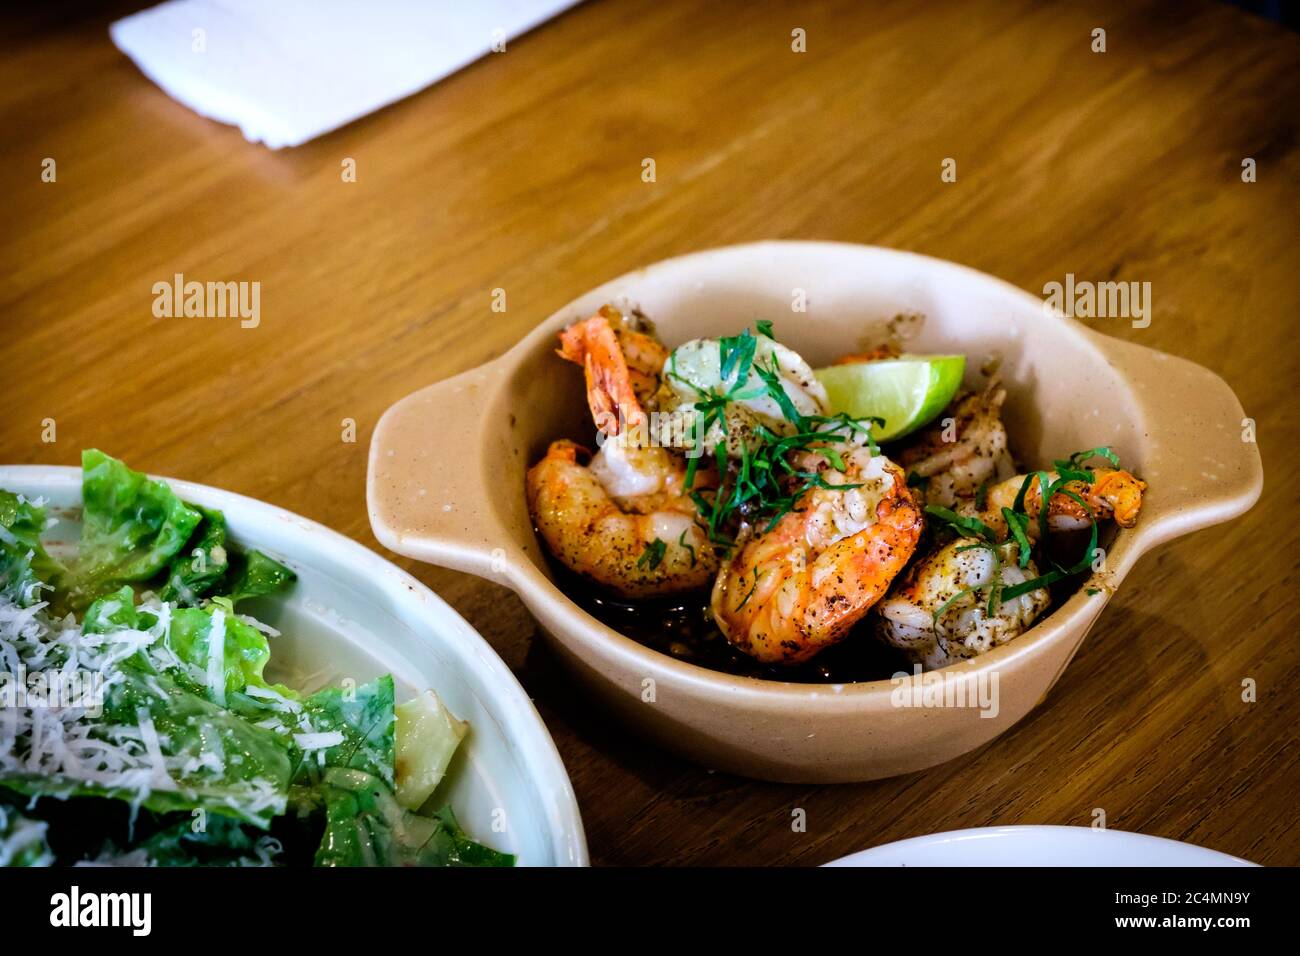 Freshly delicious grilled Gambas al Ajillo, Spanish style sizzling chilli-and-garlic Tapas shrimp pinchos, served on a wooden table Stock Photo